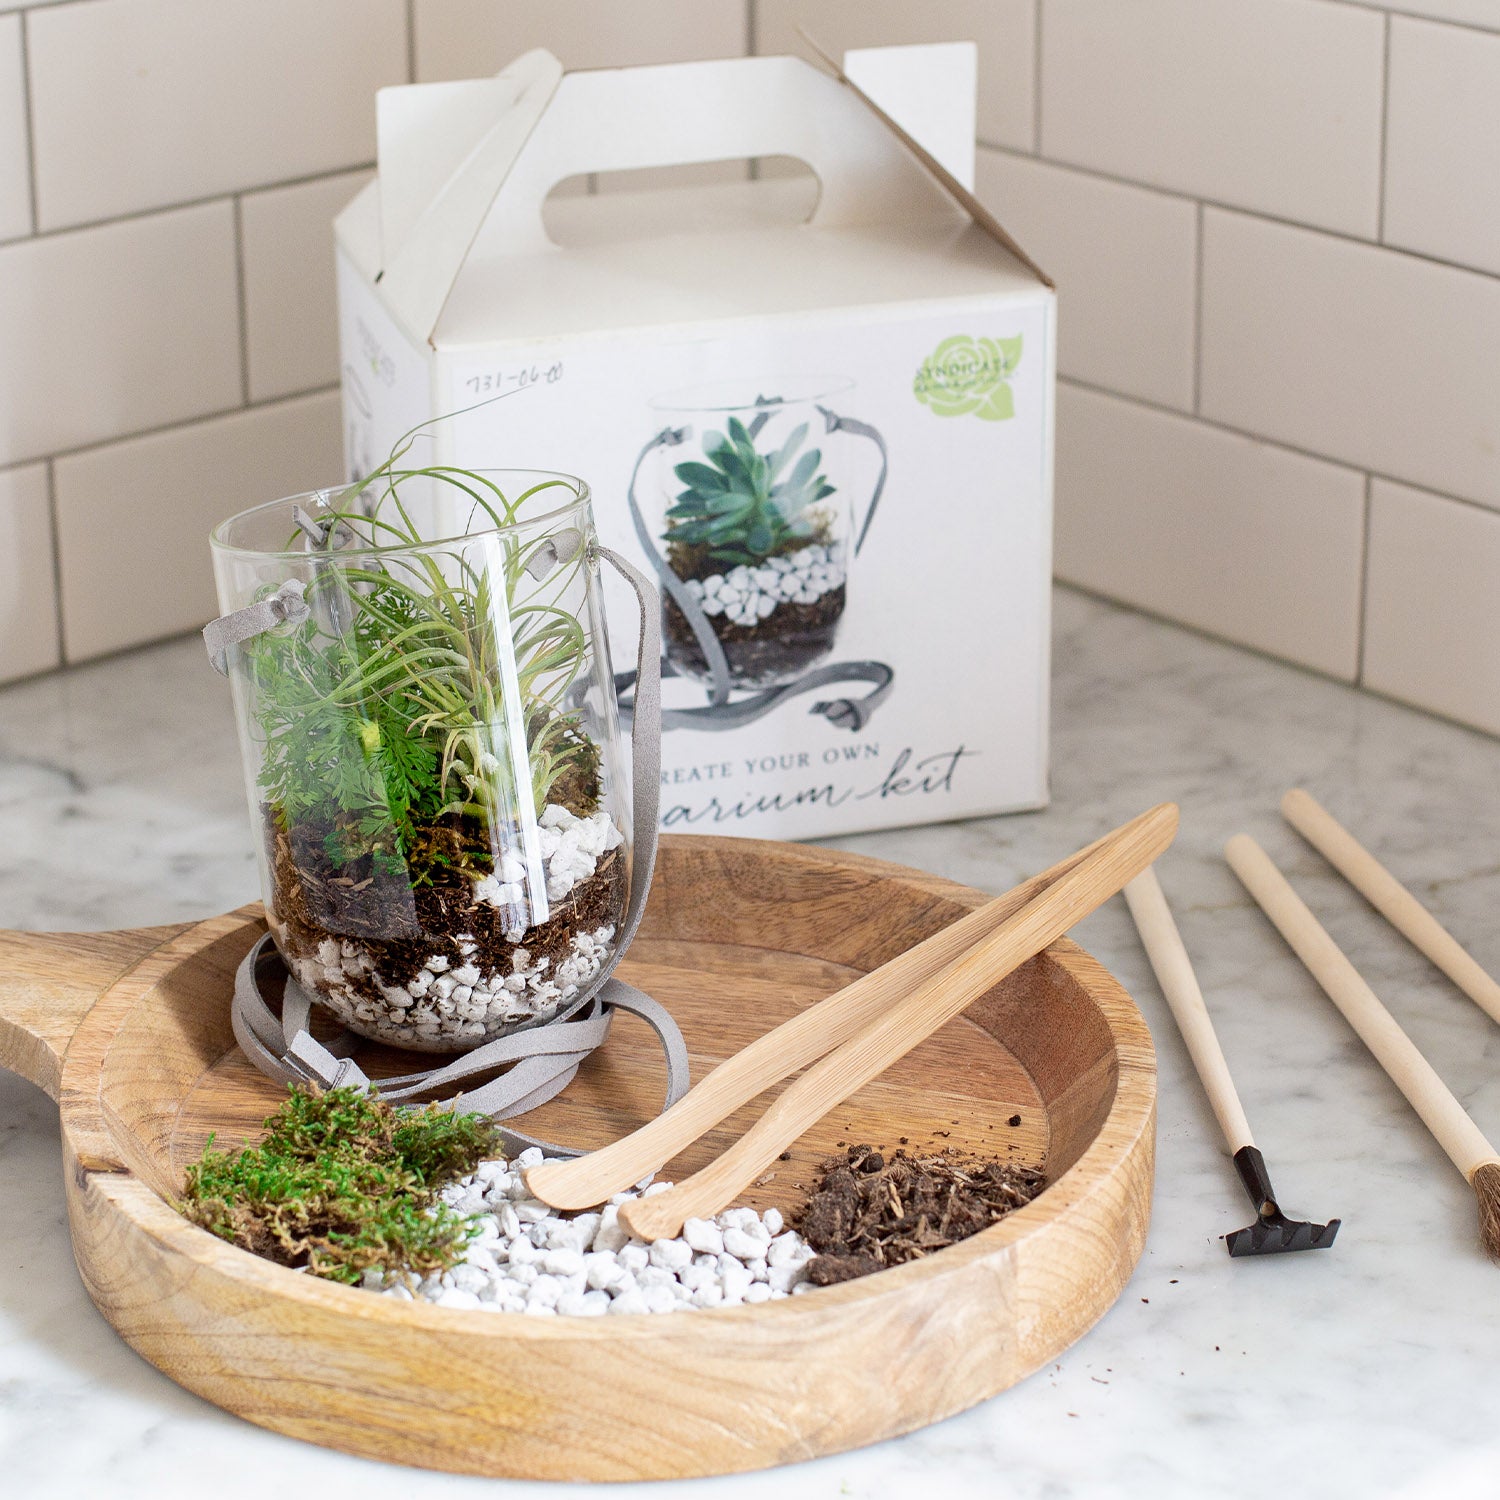 The image shows a completed terrarium inside a clear glass vessel with gray handles, set on a round wooden tray with compartments containing different terrarium materials such as soil and white pebbles. Wooden tools for terrarium assembly—a rake, shovel, and trowel—are also laid out on the tray. In the background, there's a white box with an image and text indicating "Create Your Own Terrarium Kit," against a kitchen backdrop with white subway tiles.